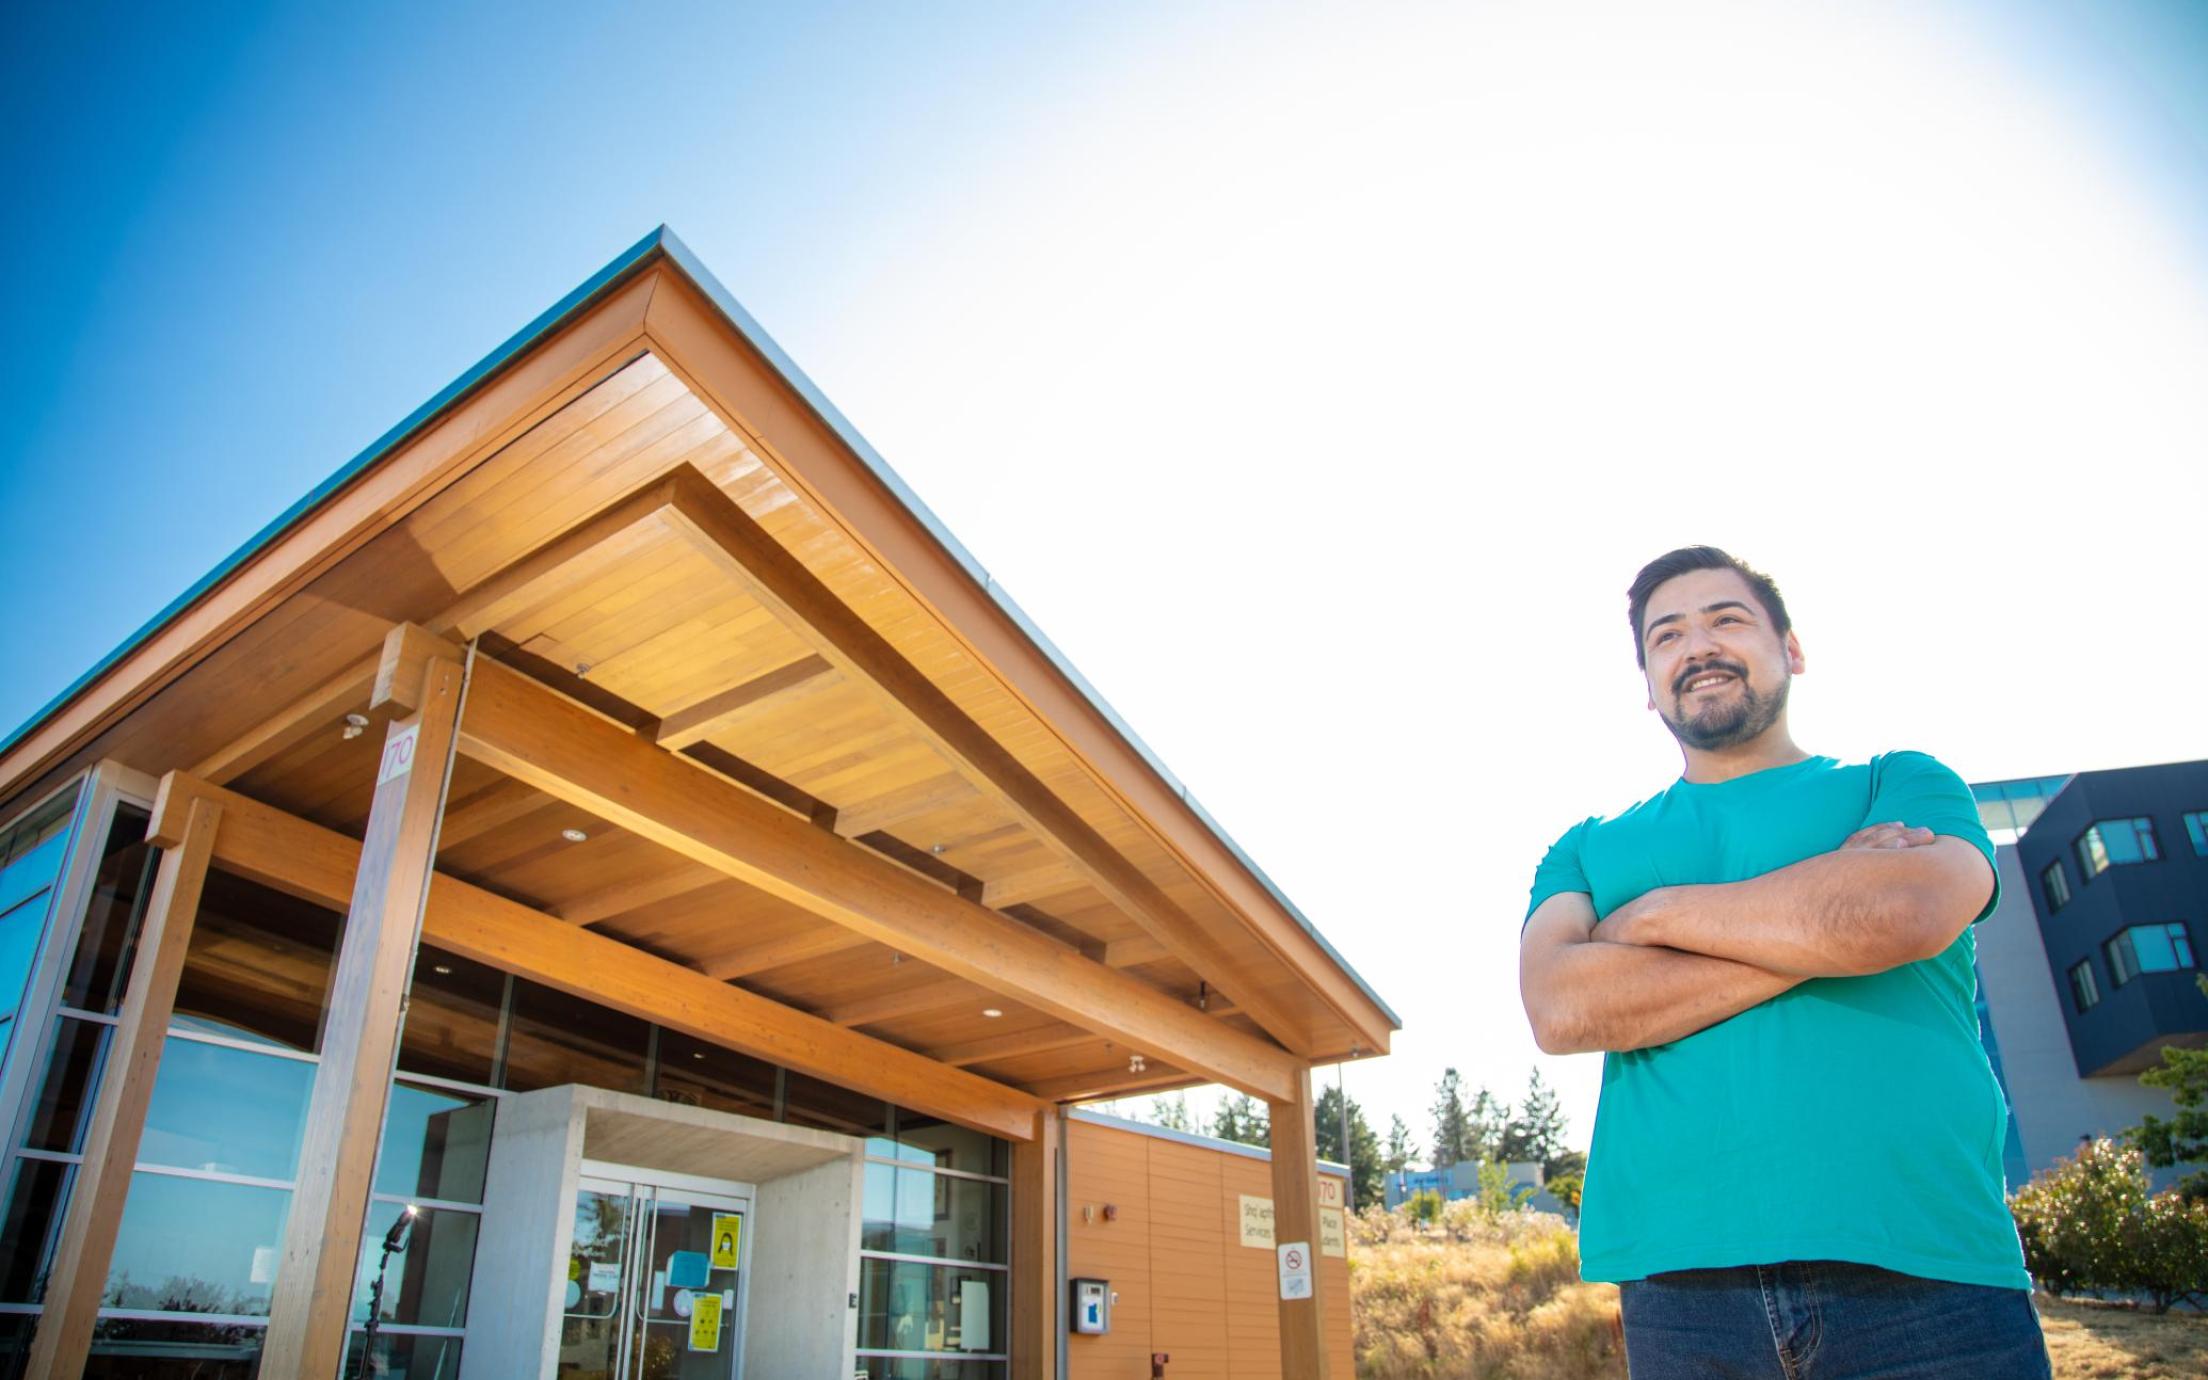 Hayden stands in front of Shq'apthut, VIU's Indigenous gathering place on the Nanaimo campus